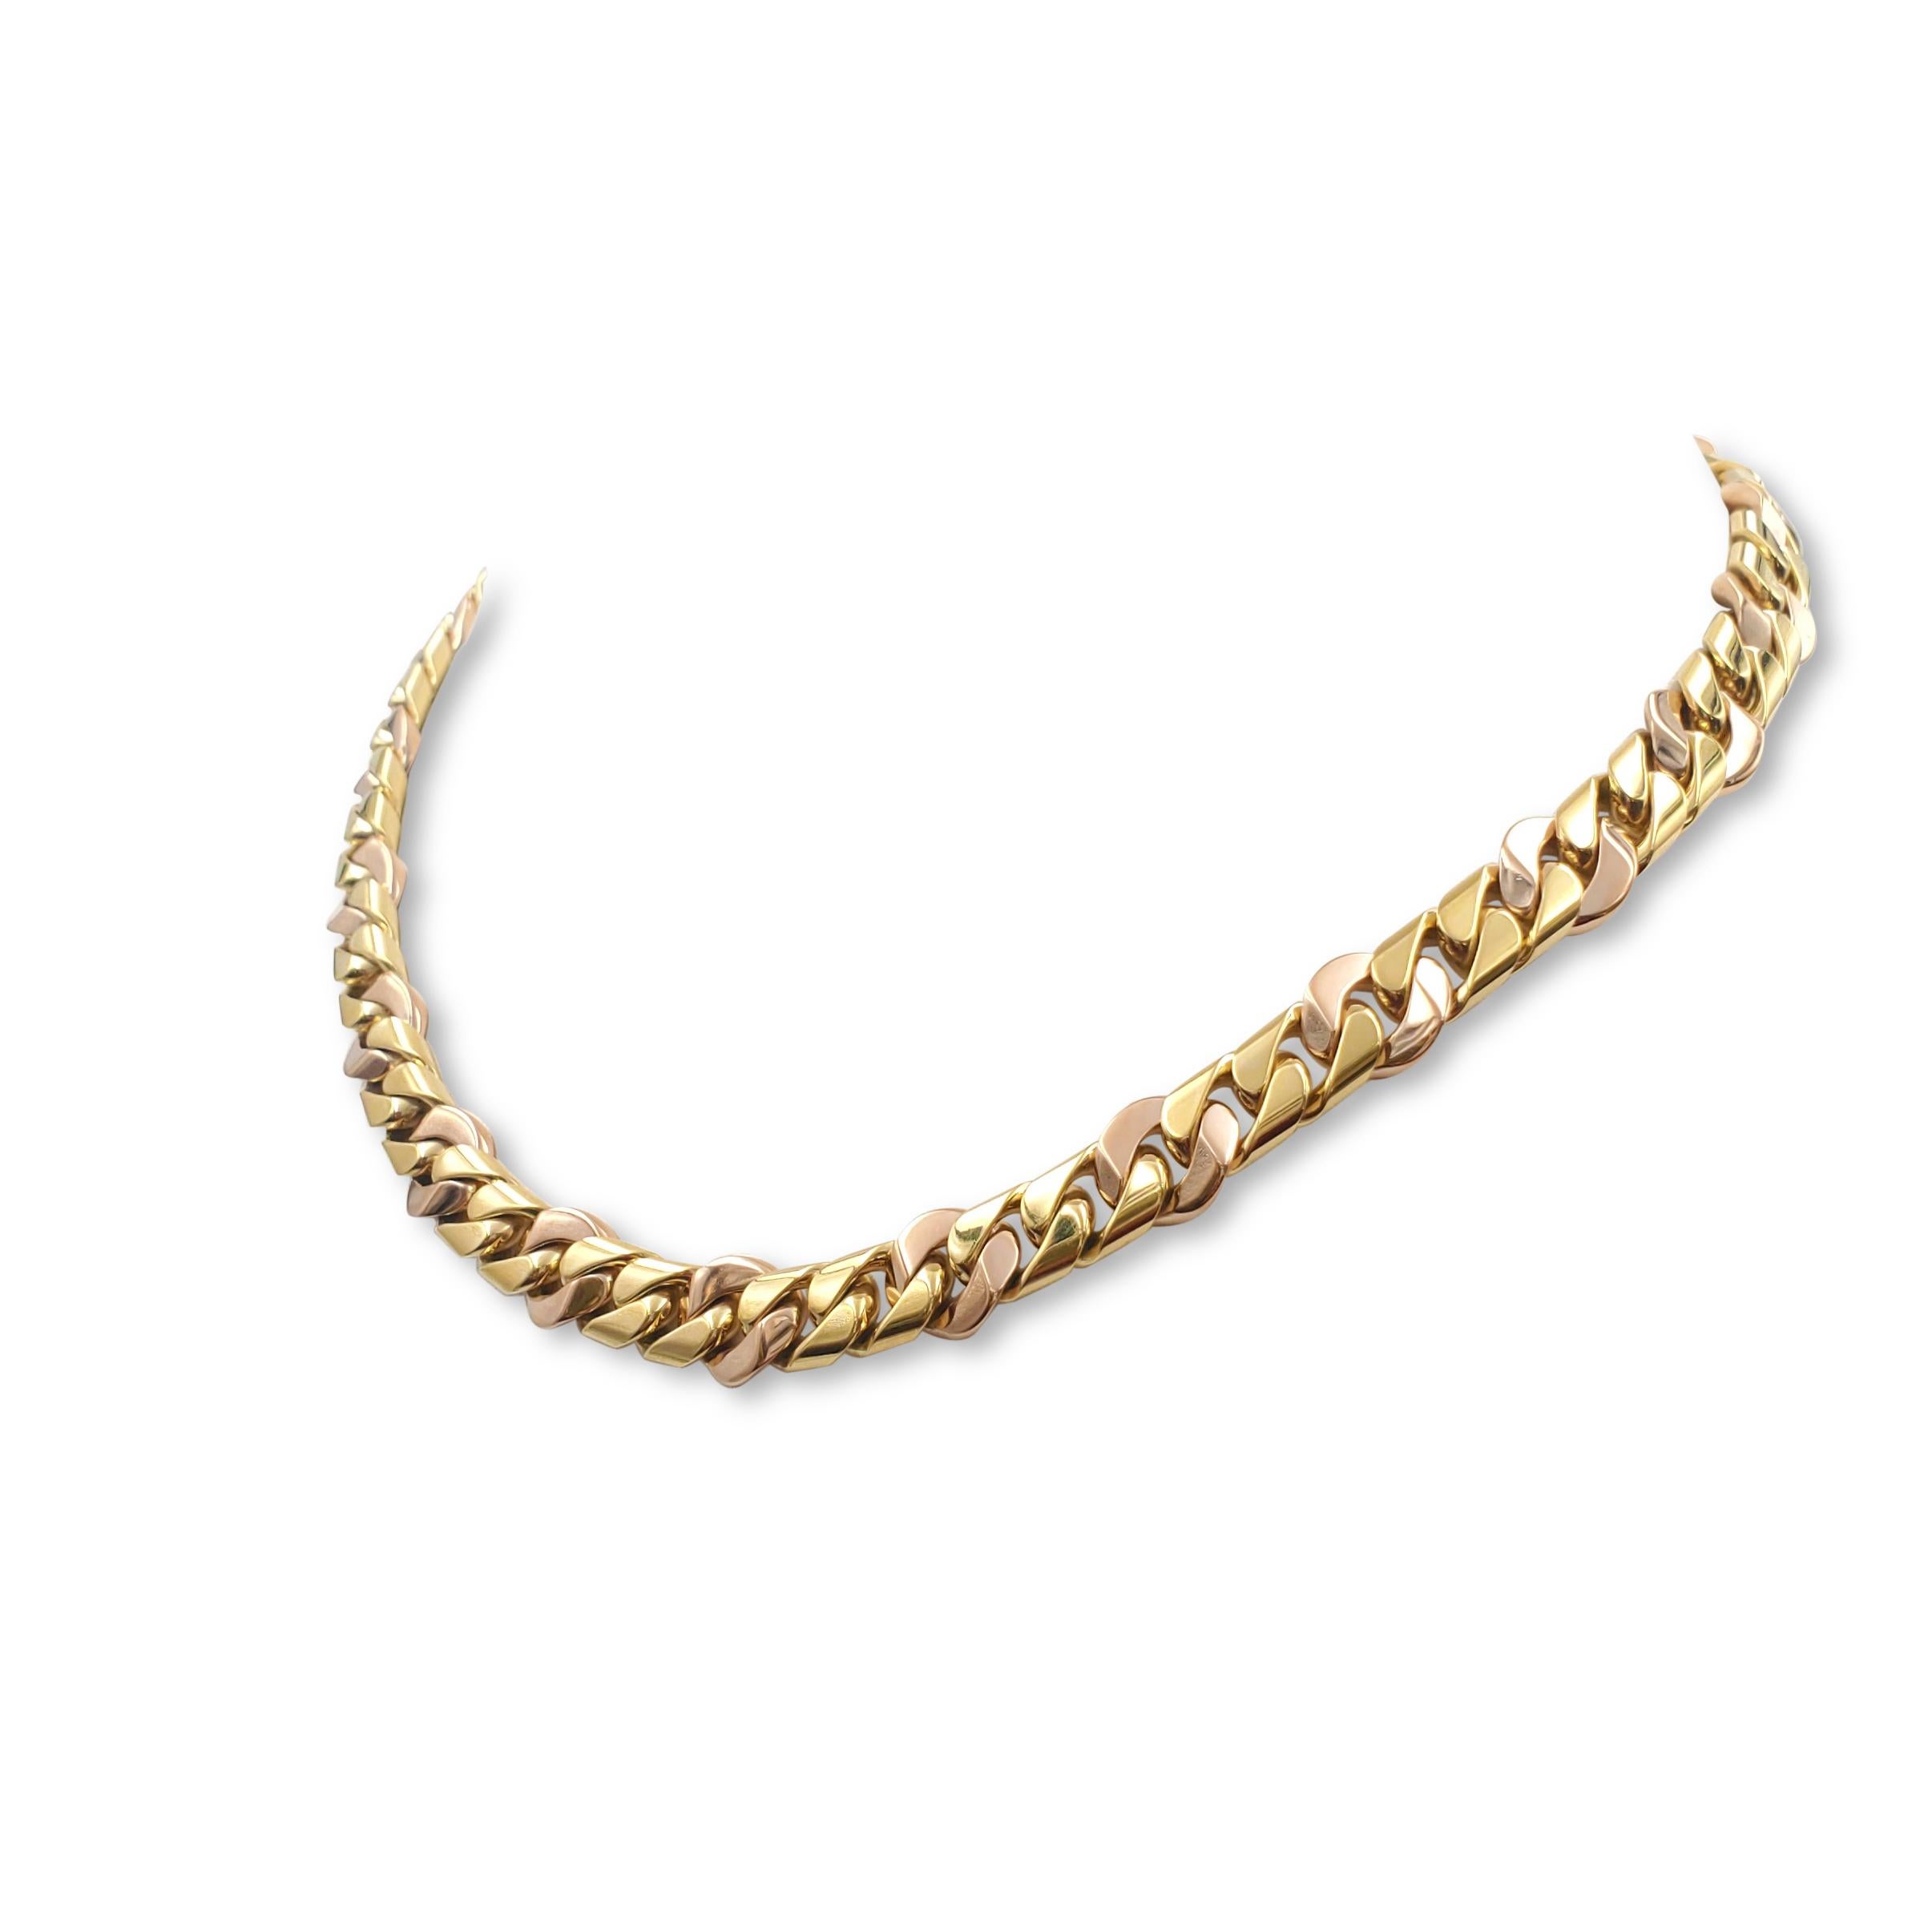 Authentic Bvlgari necklace crafted in 18 karat yellow and rose gold.  Alternating yellow gold rectangular curb links and larger rounded curb links in rose gold are combined here for a stunning effect.  The necklace is 17 inches in total length with